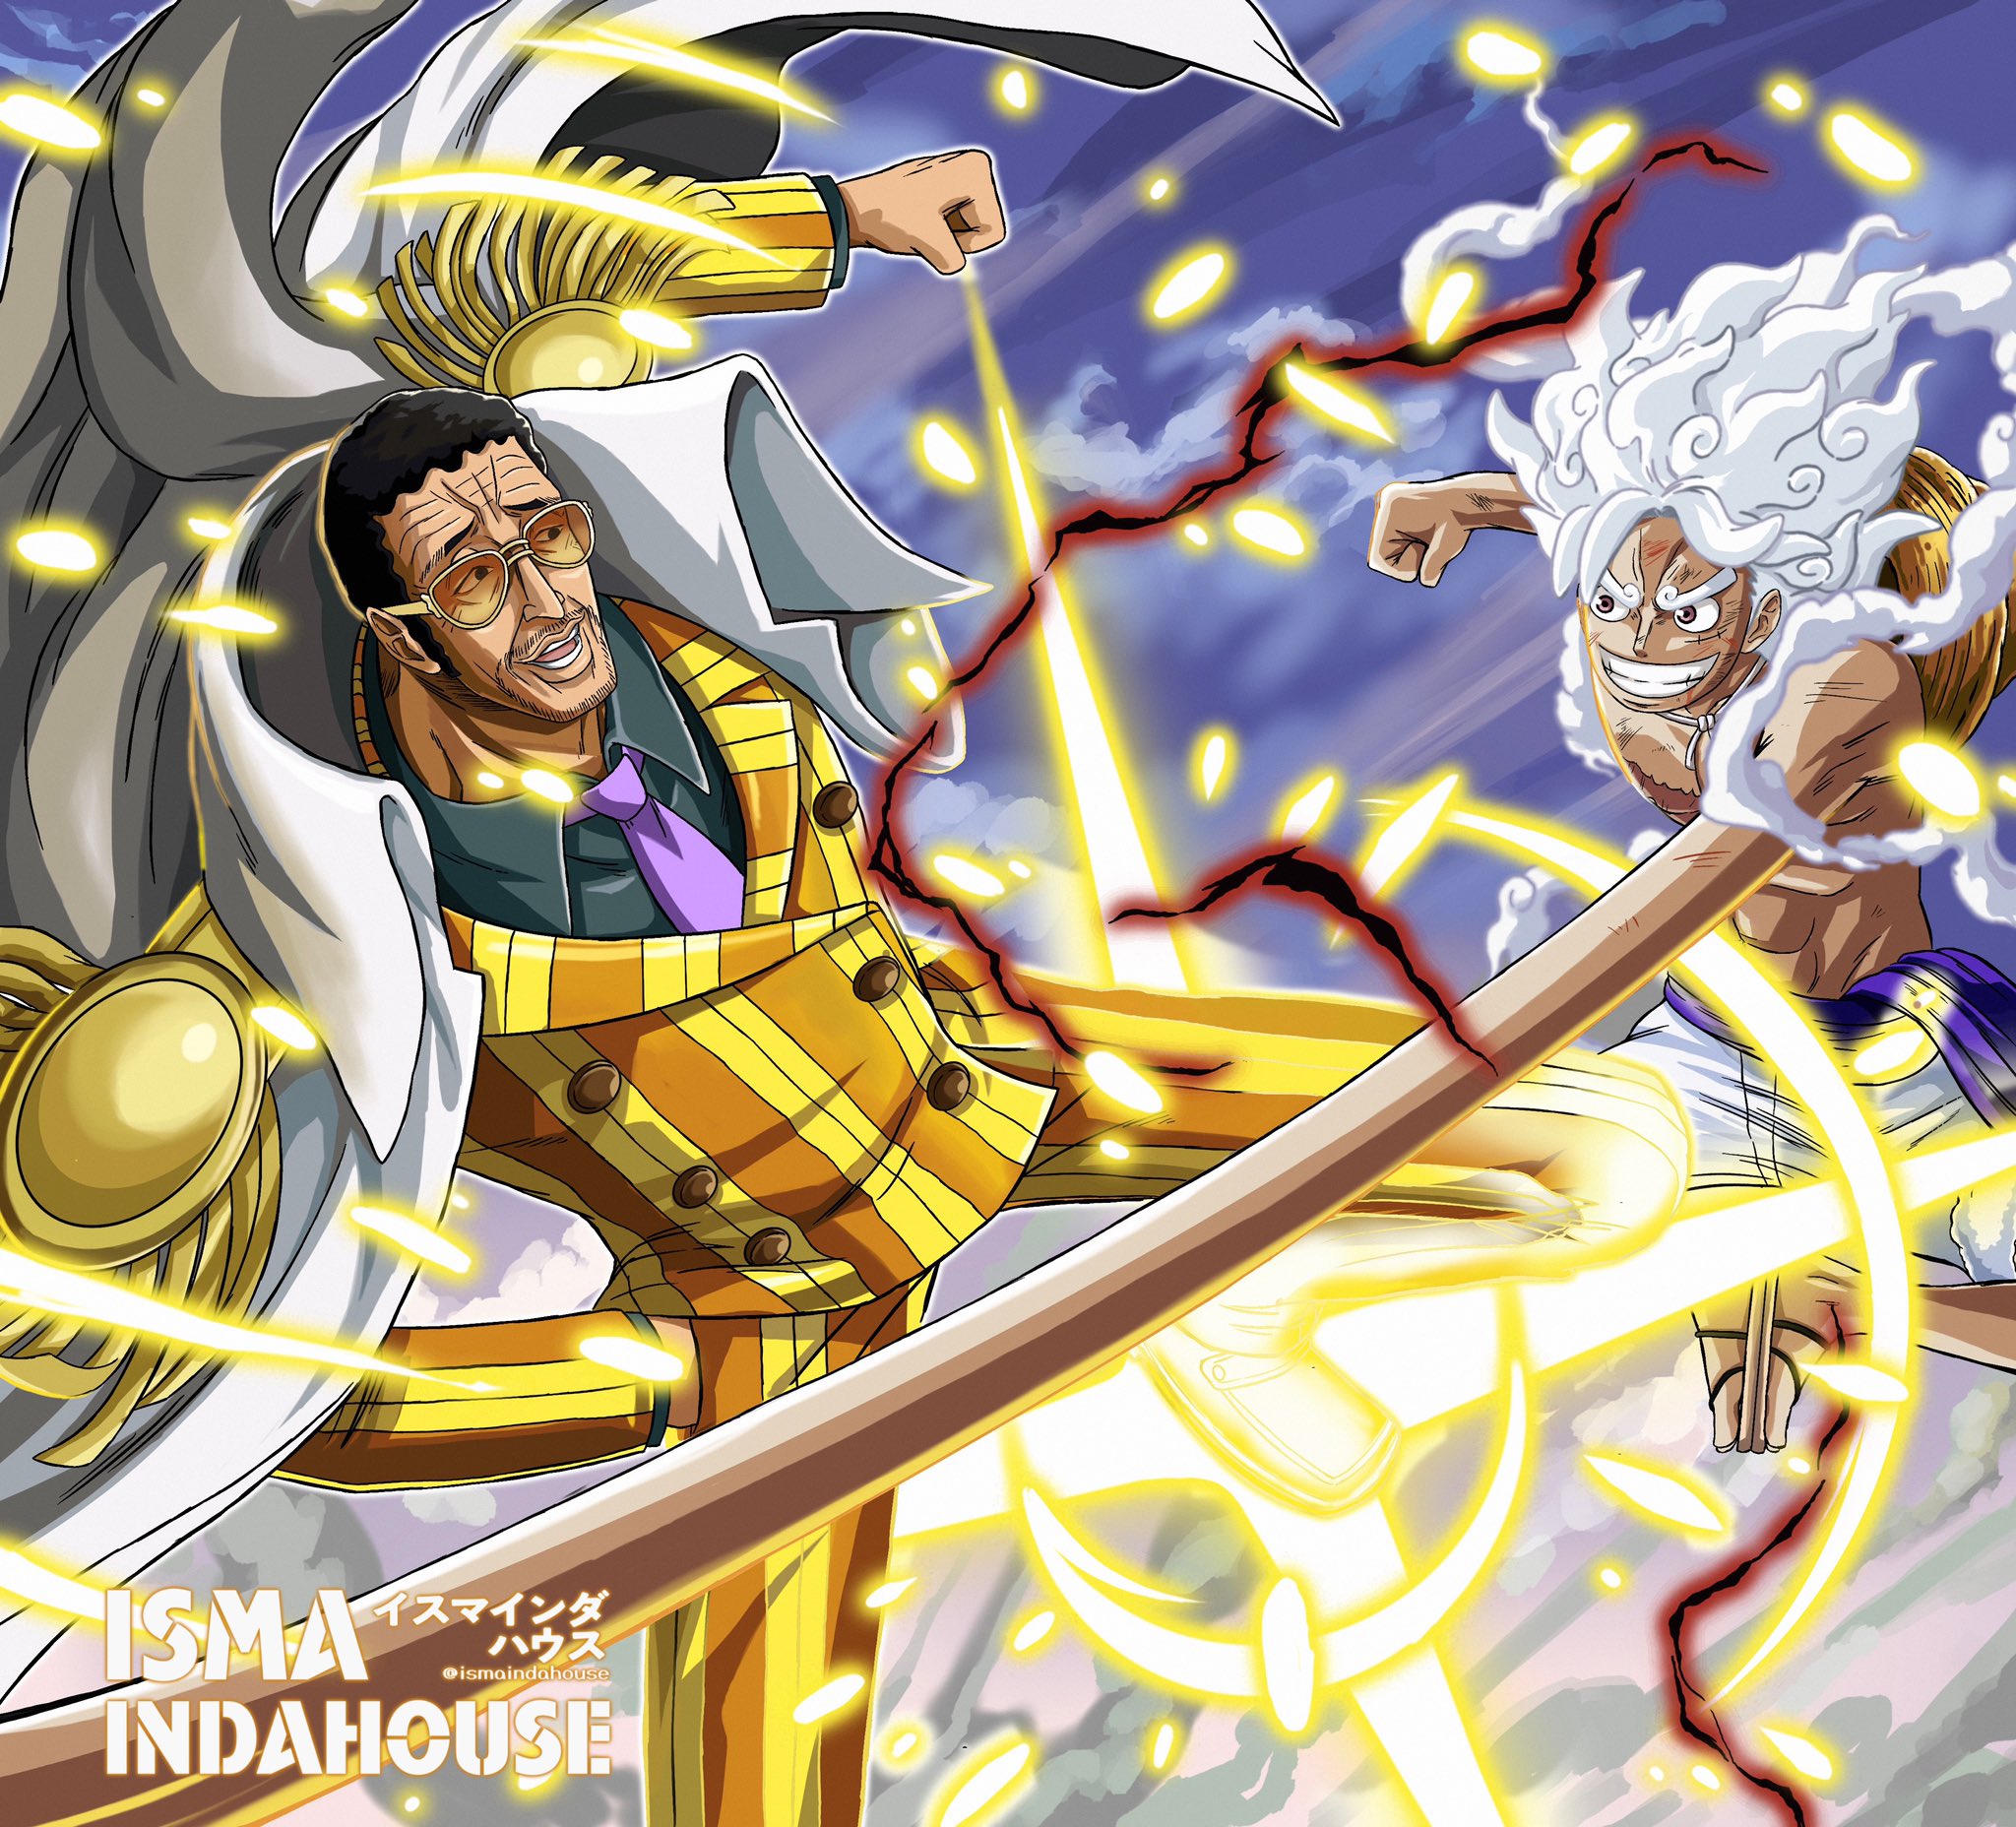 One Piece 1106: Will Luffy Use Gear 5 in battle against Saturn and Kizaru?